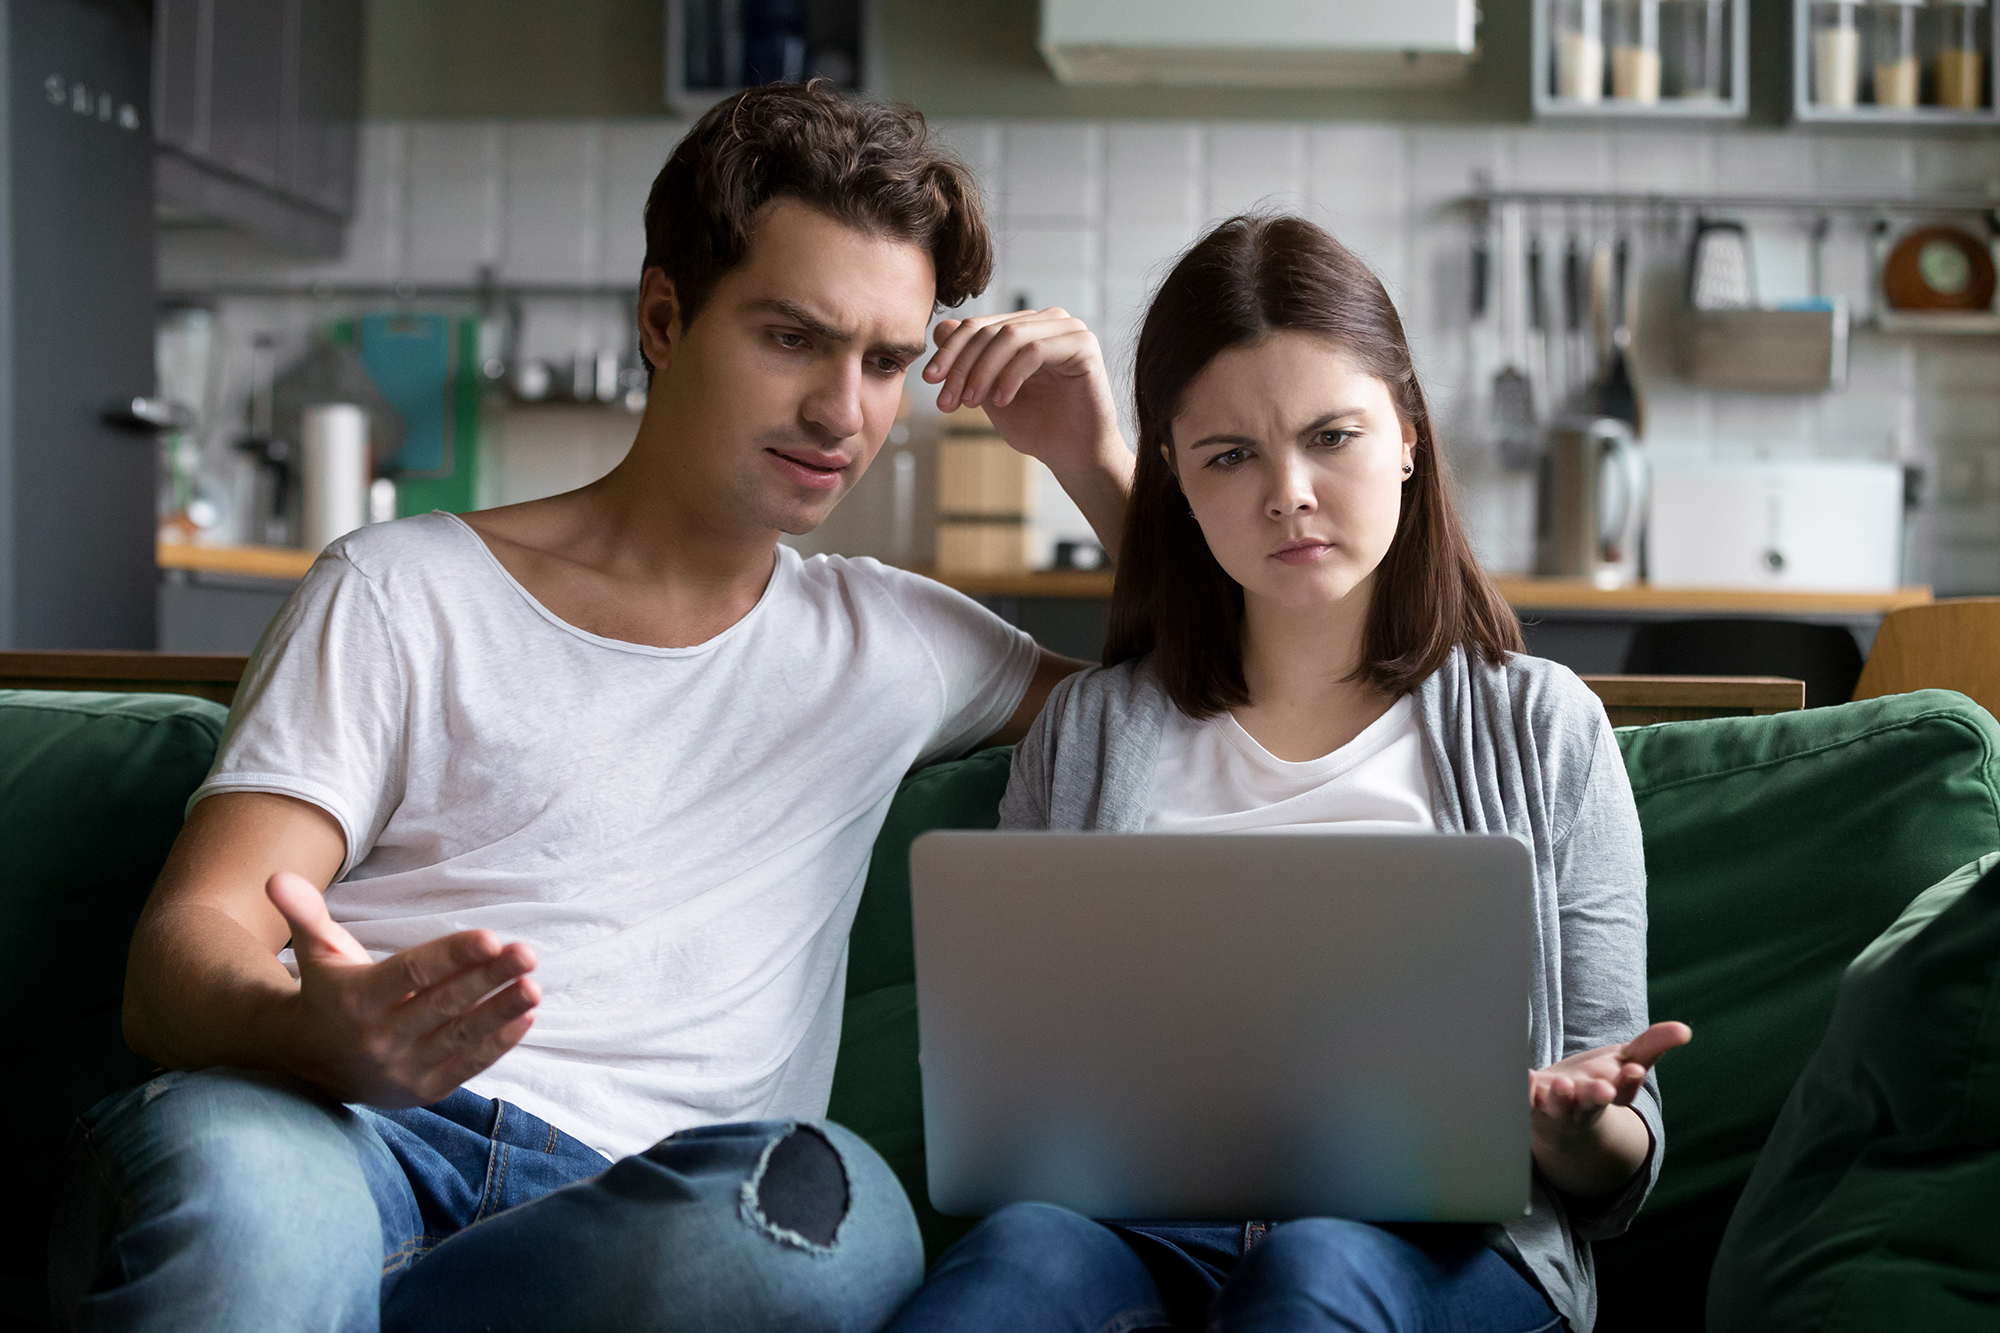 Annoyed couple looking at email. (Image: Shutterstock)